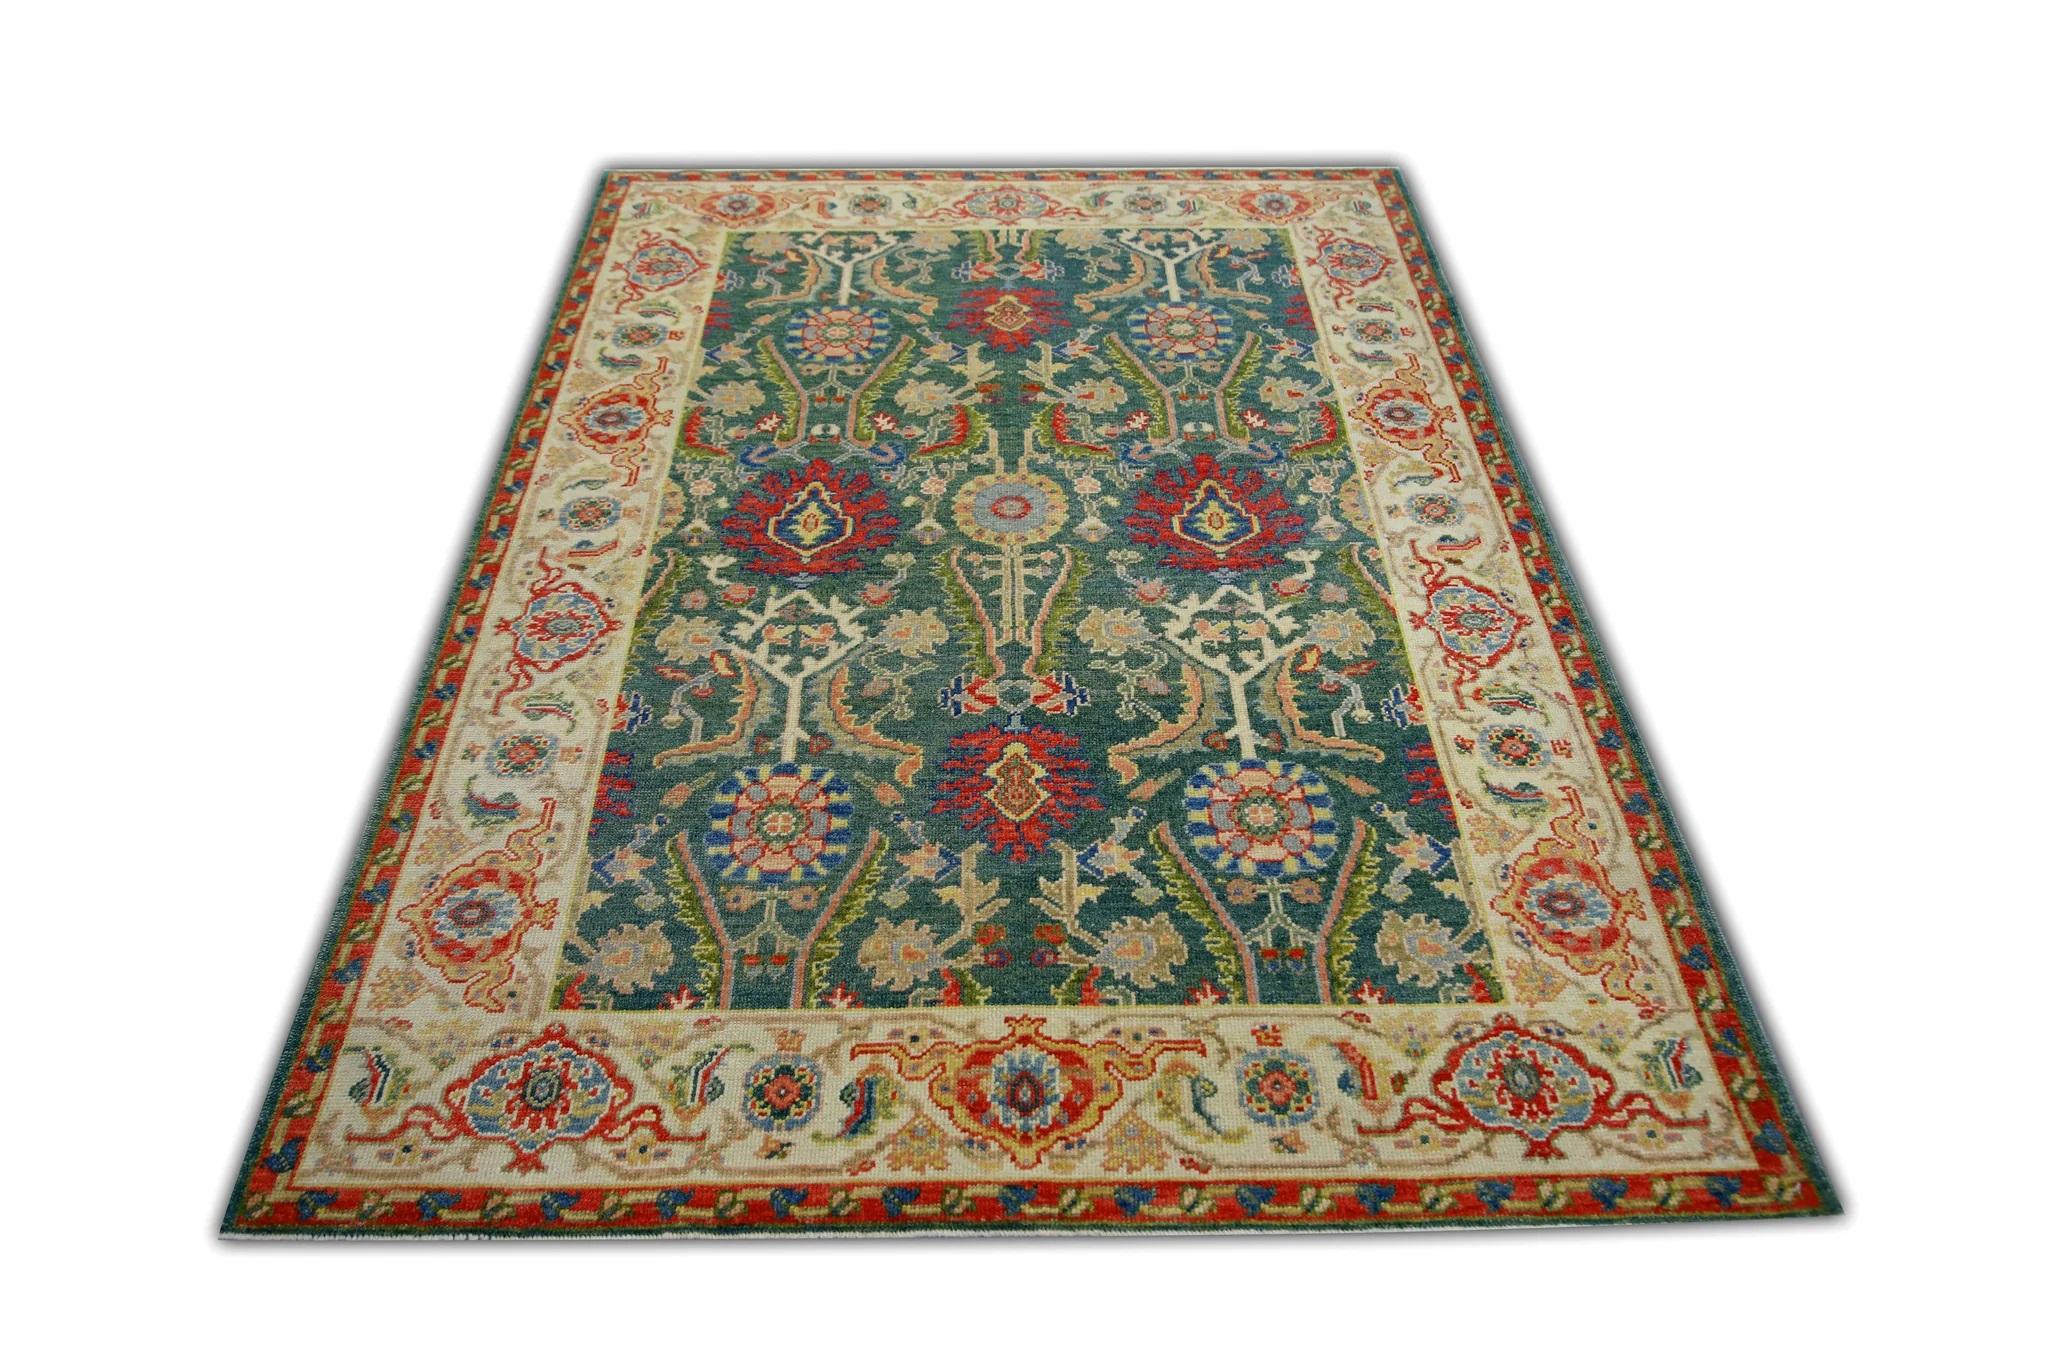 Contemporary Green & Red Floral Design Handwoven Wool Turkish Finewoven Oushak Rug 4'3 x 6'3 For Sale